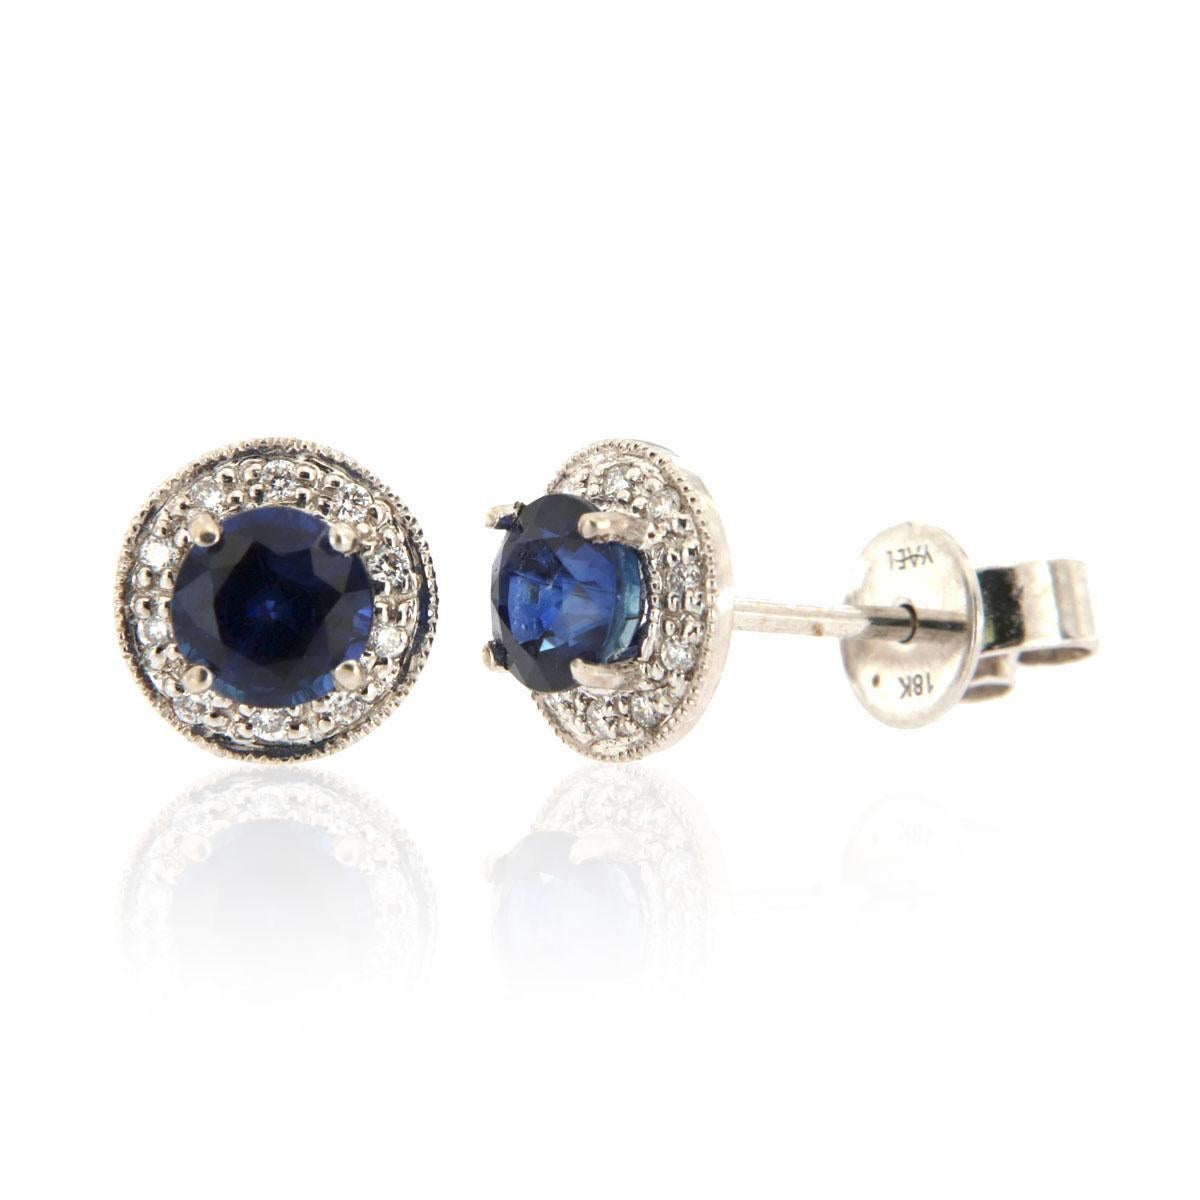 These classic stud earrings feature a 1-carat total weight of round shape Blue Sapphires in Exceptional quality surrounded by a halo of full-cut diamonds

Product details: 

Center Gemstone Type: Blue Sapphire
Center Gemstone Carat Weight: